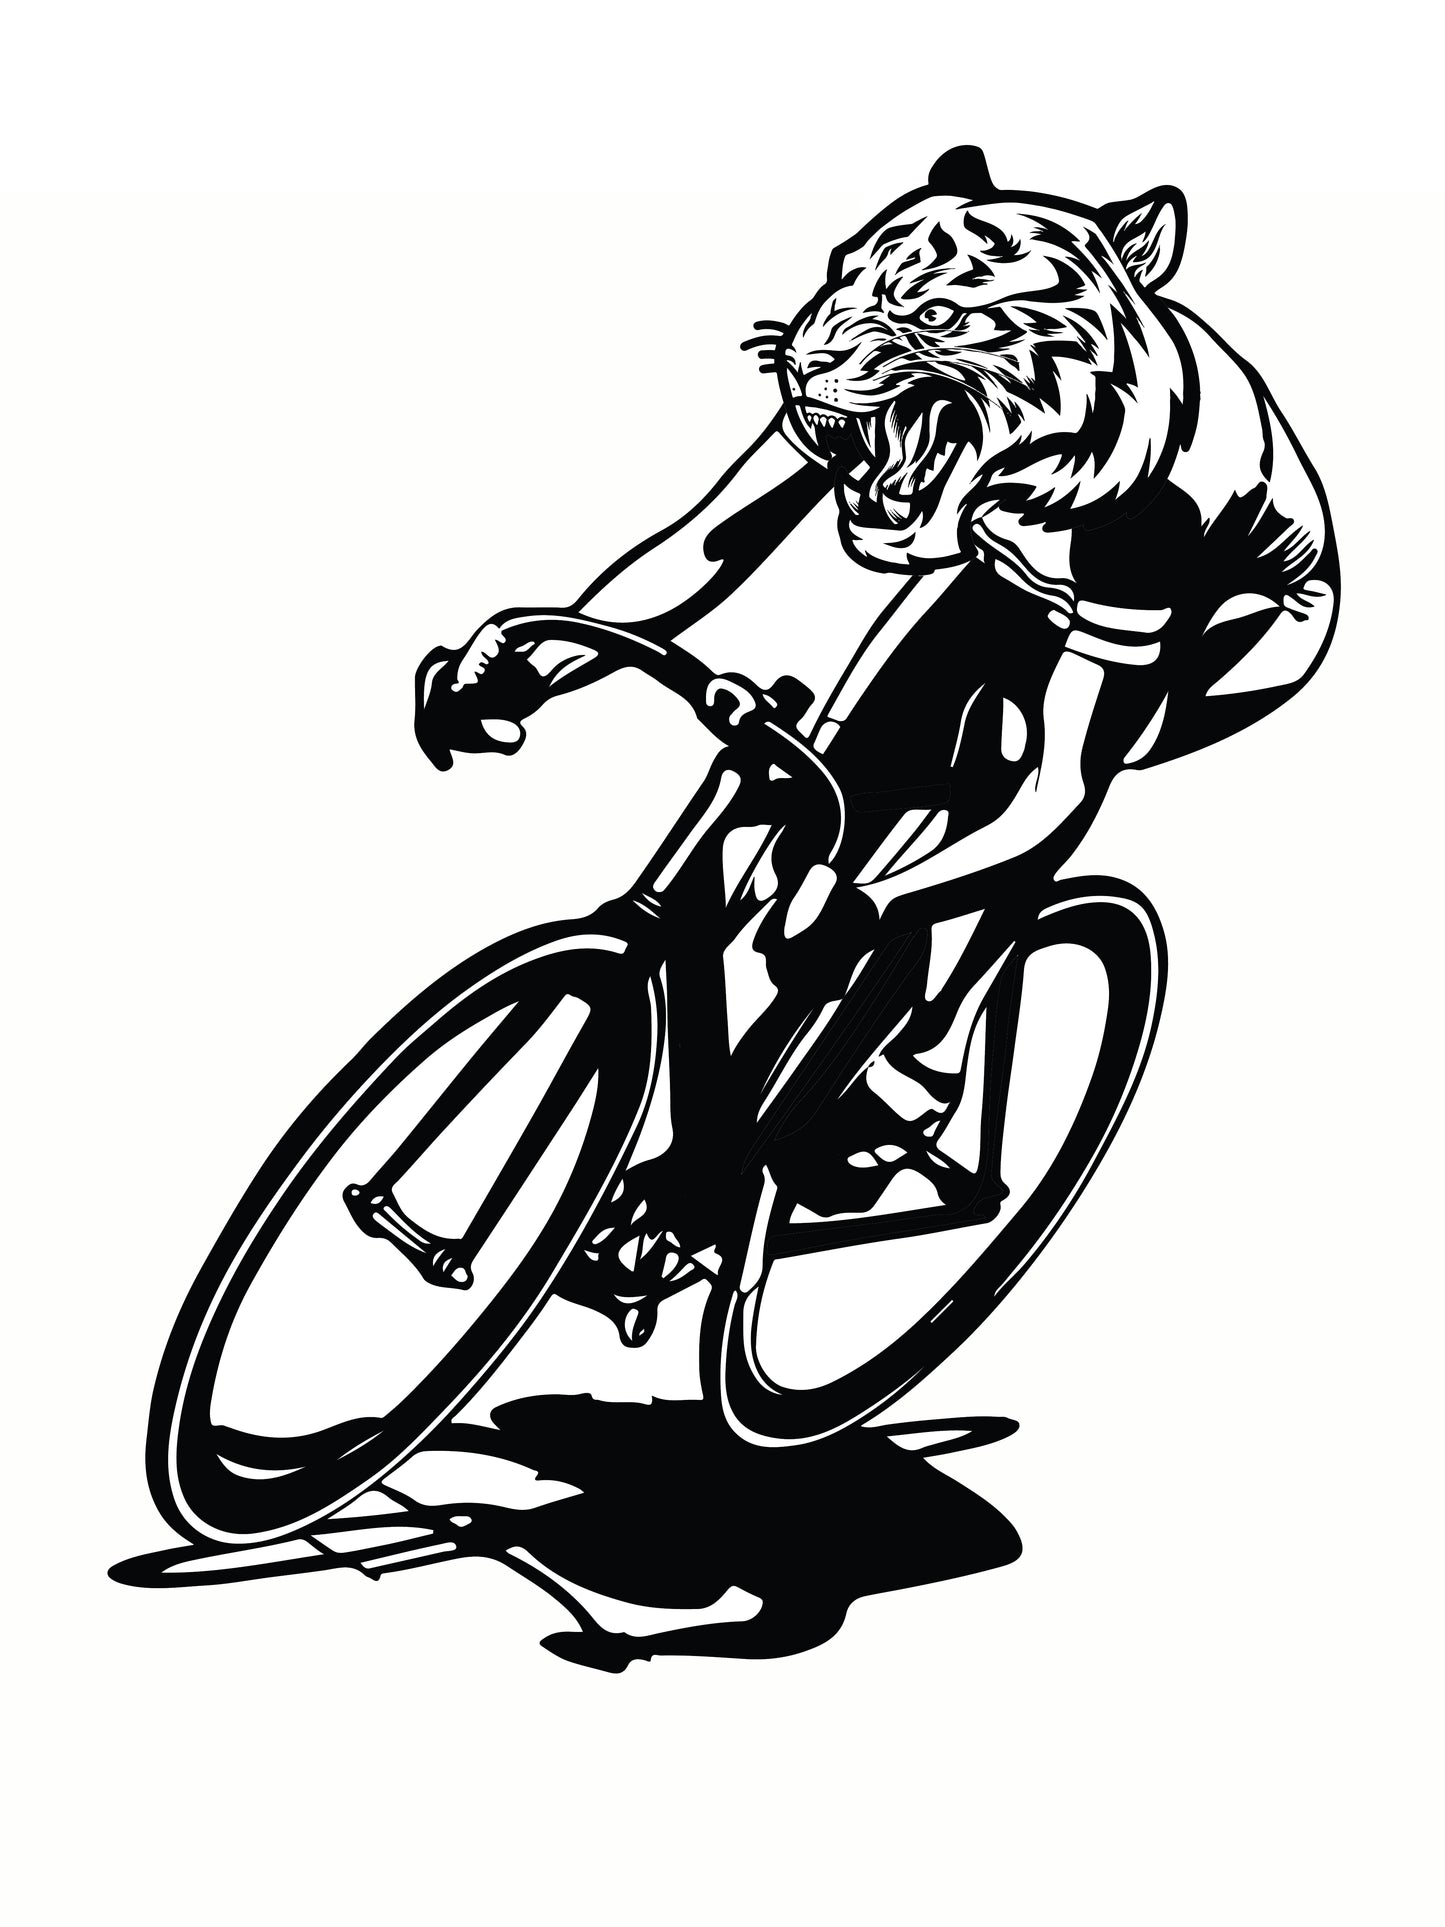 Limited Edition Tiger Cyclist 13 x 19 Poster Print